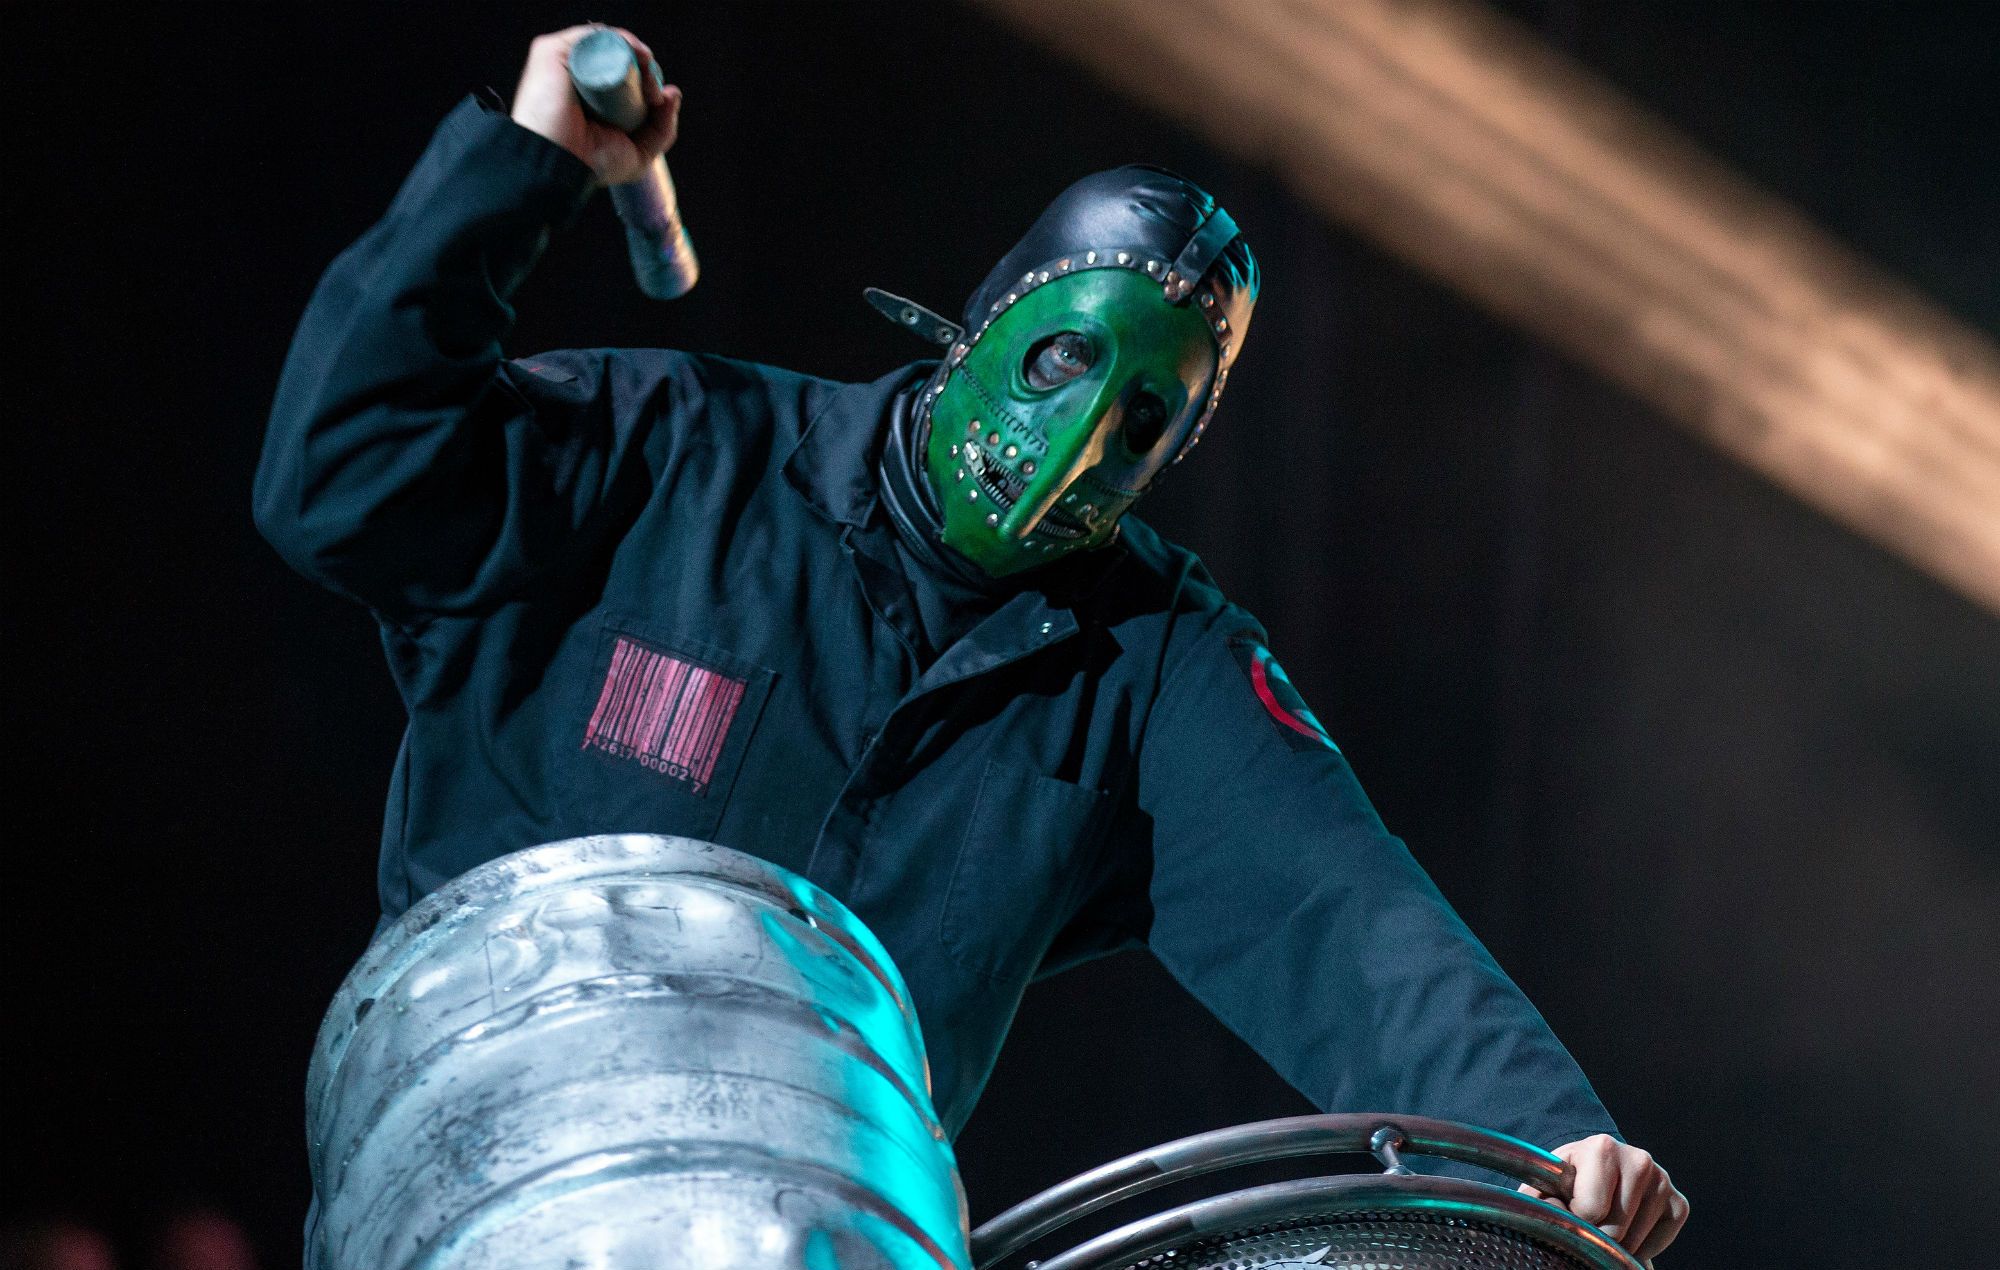 Slipknot's Corey Taylor says he was wrongly accused of stealing from percussionist Chris Fehn